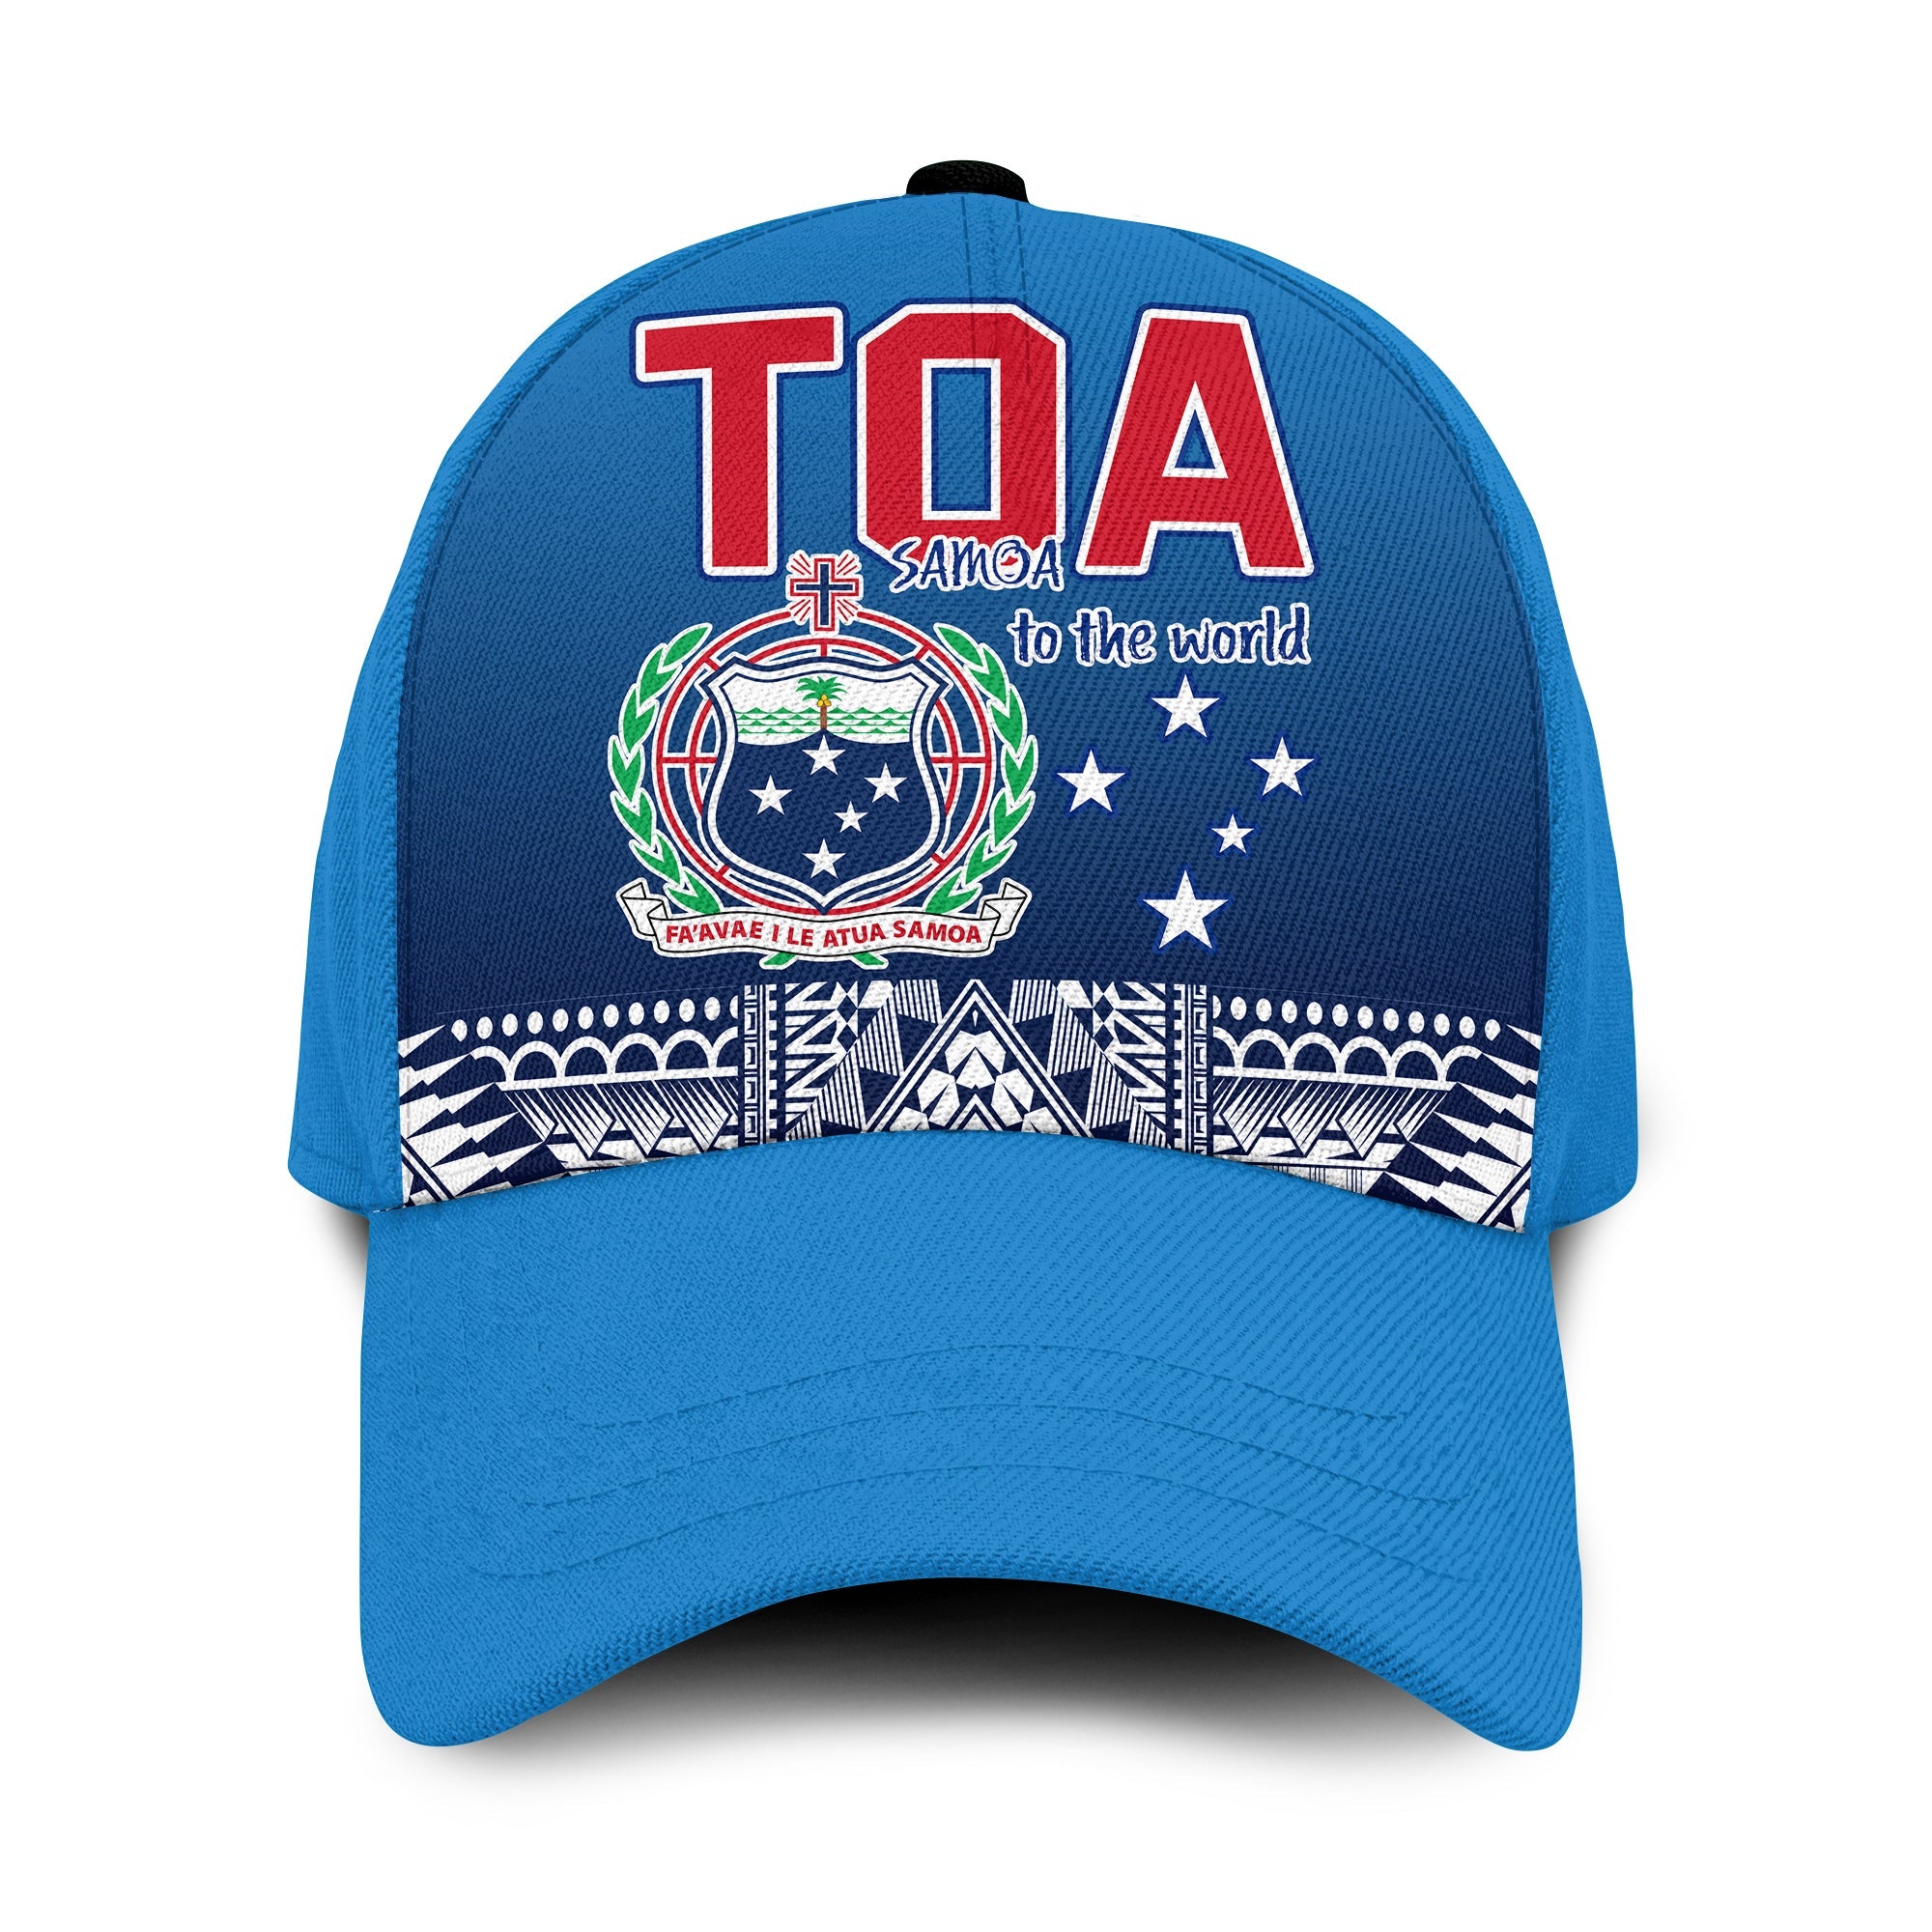 Toa Samoa Rugby Classic Cap Samoan To the World Ver.03 LT13 Classic Cap Universal Fit Blue - Polynesian Pride